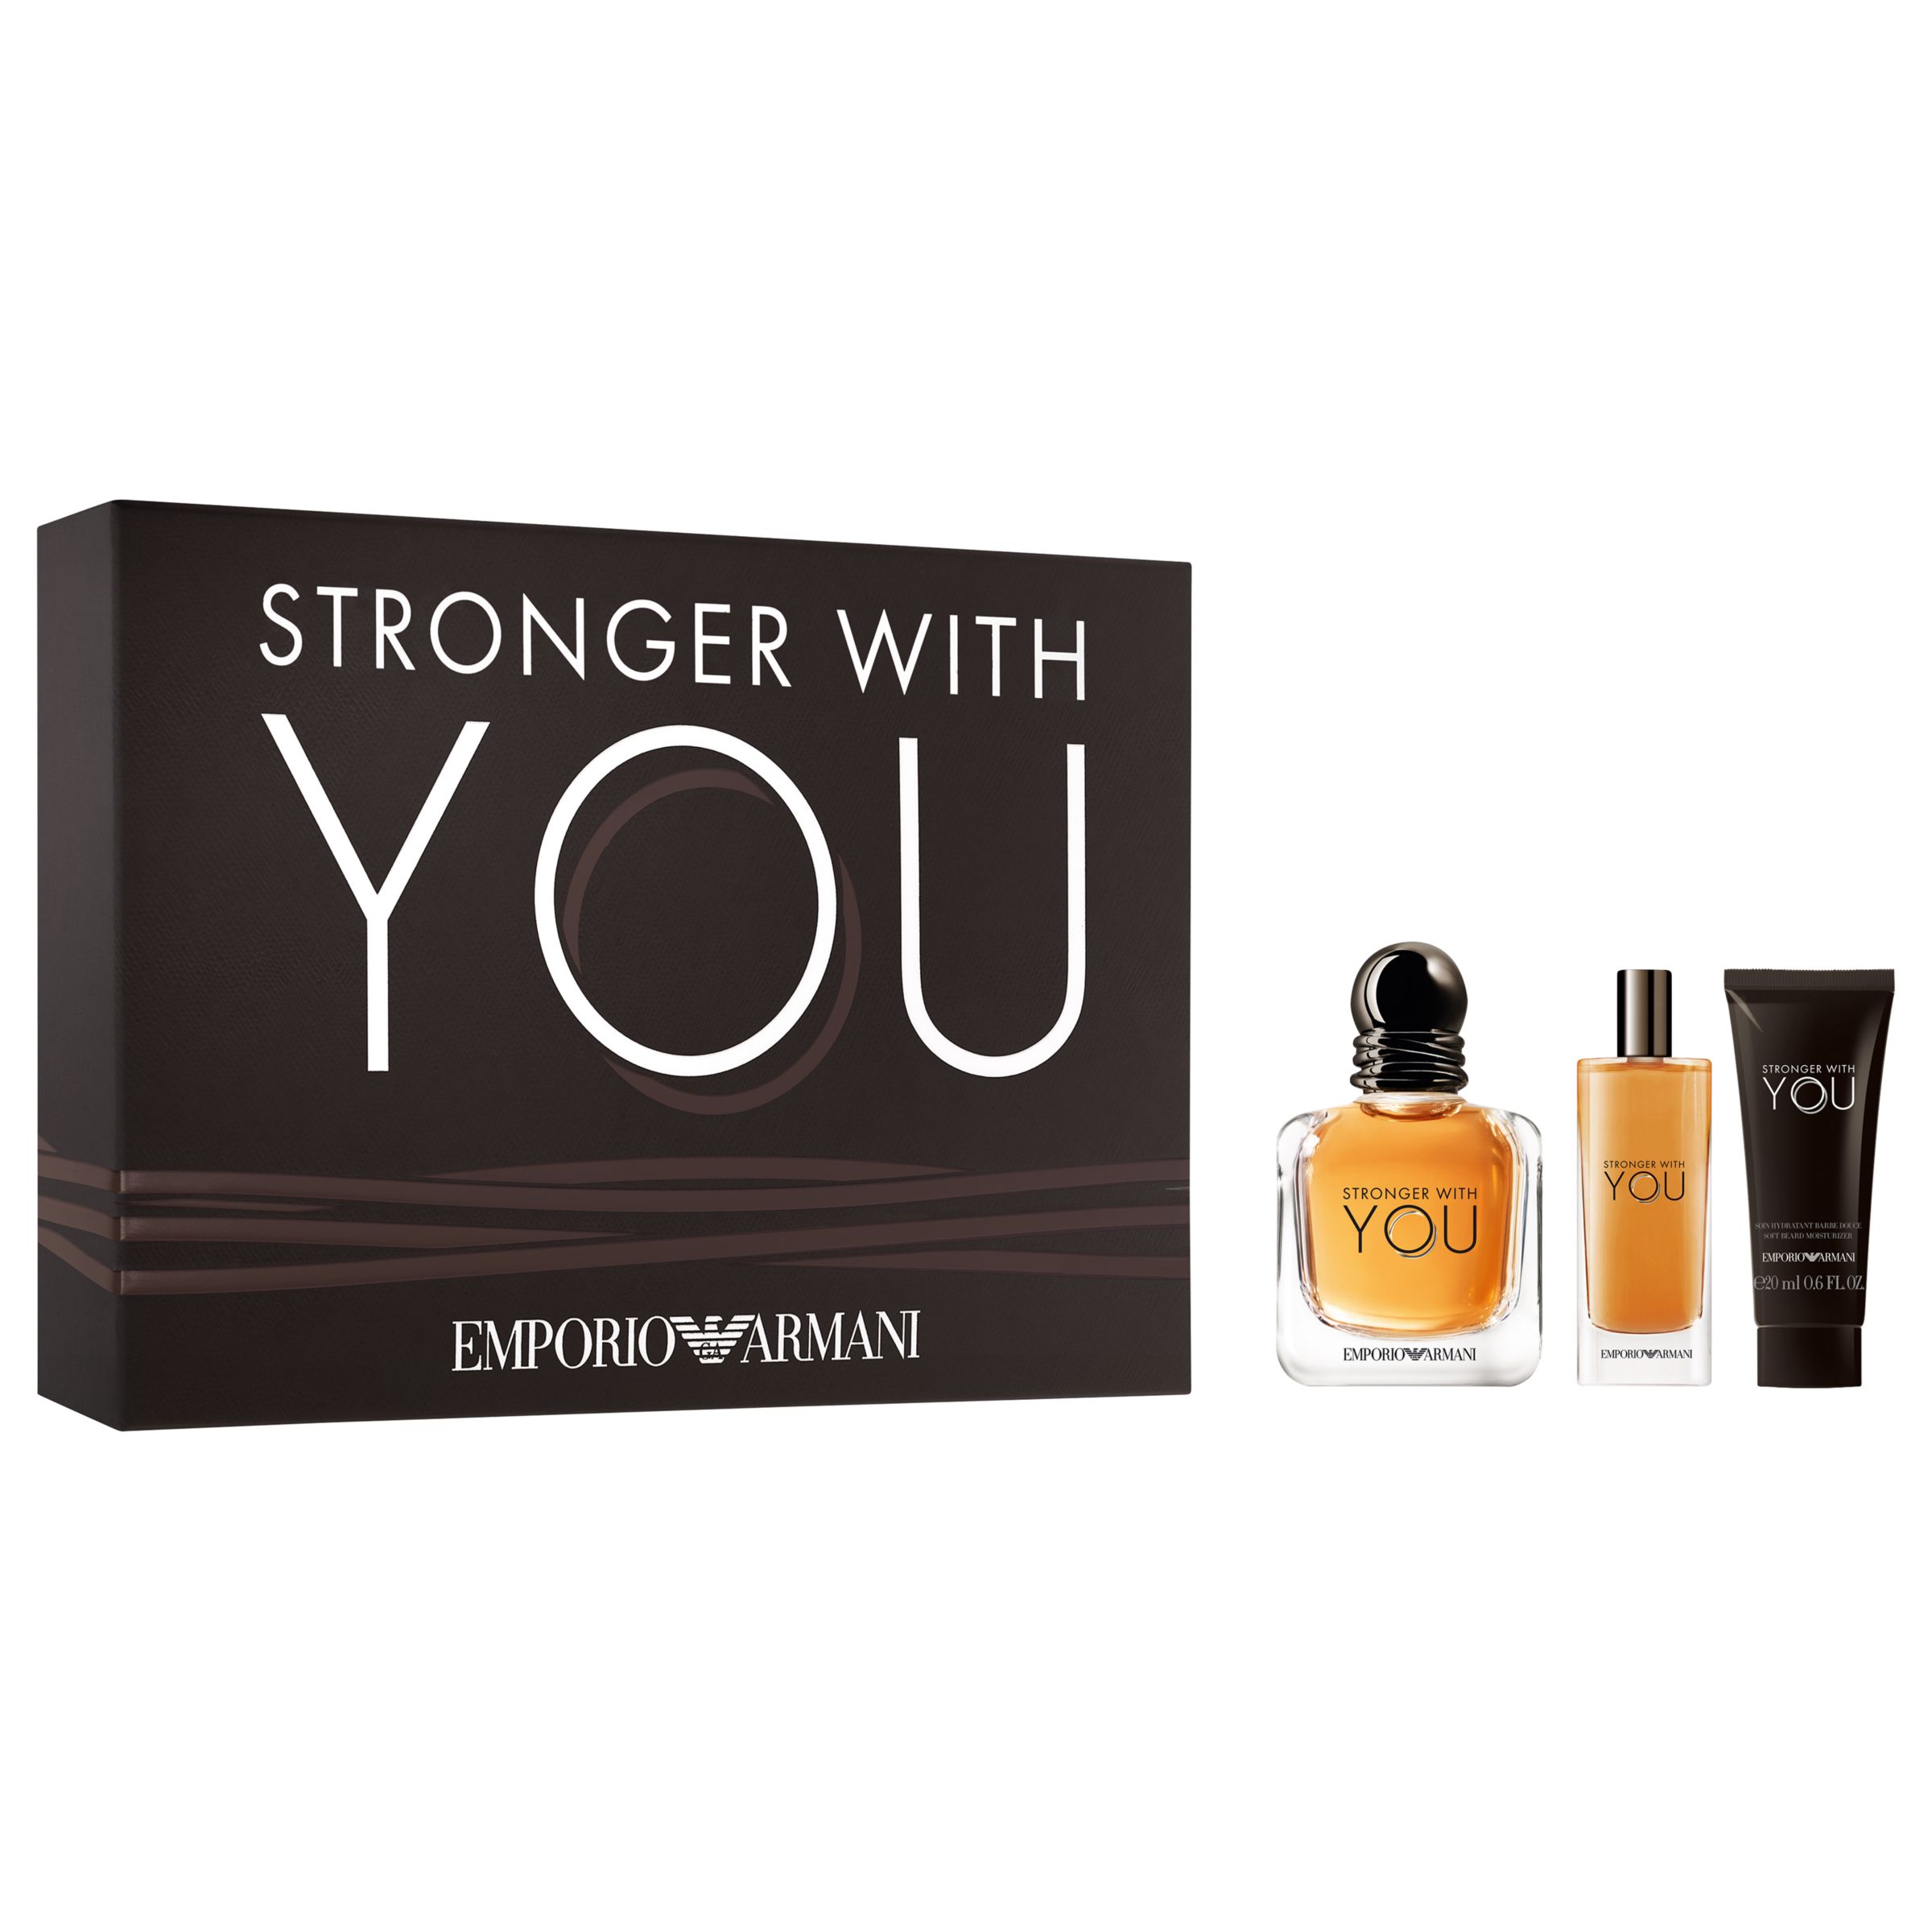 armani stronger with you gift set boots 